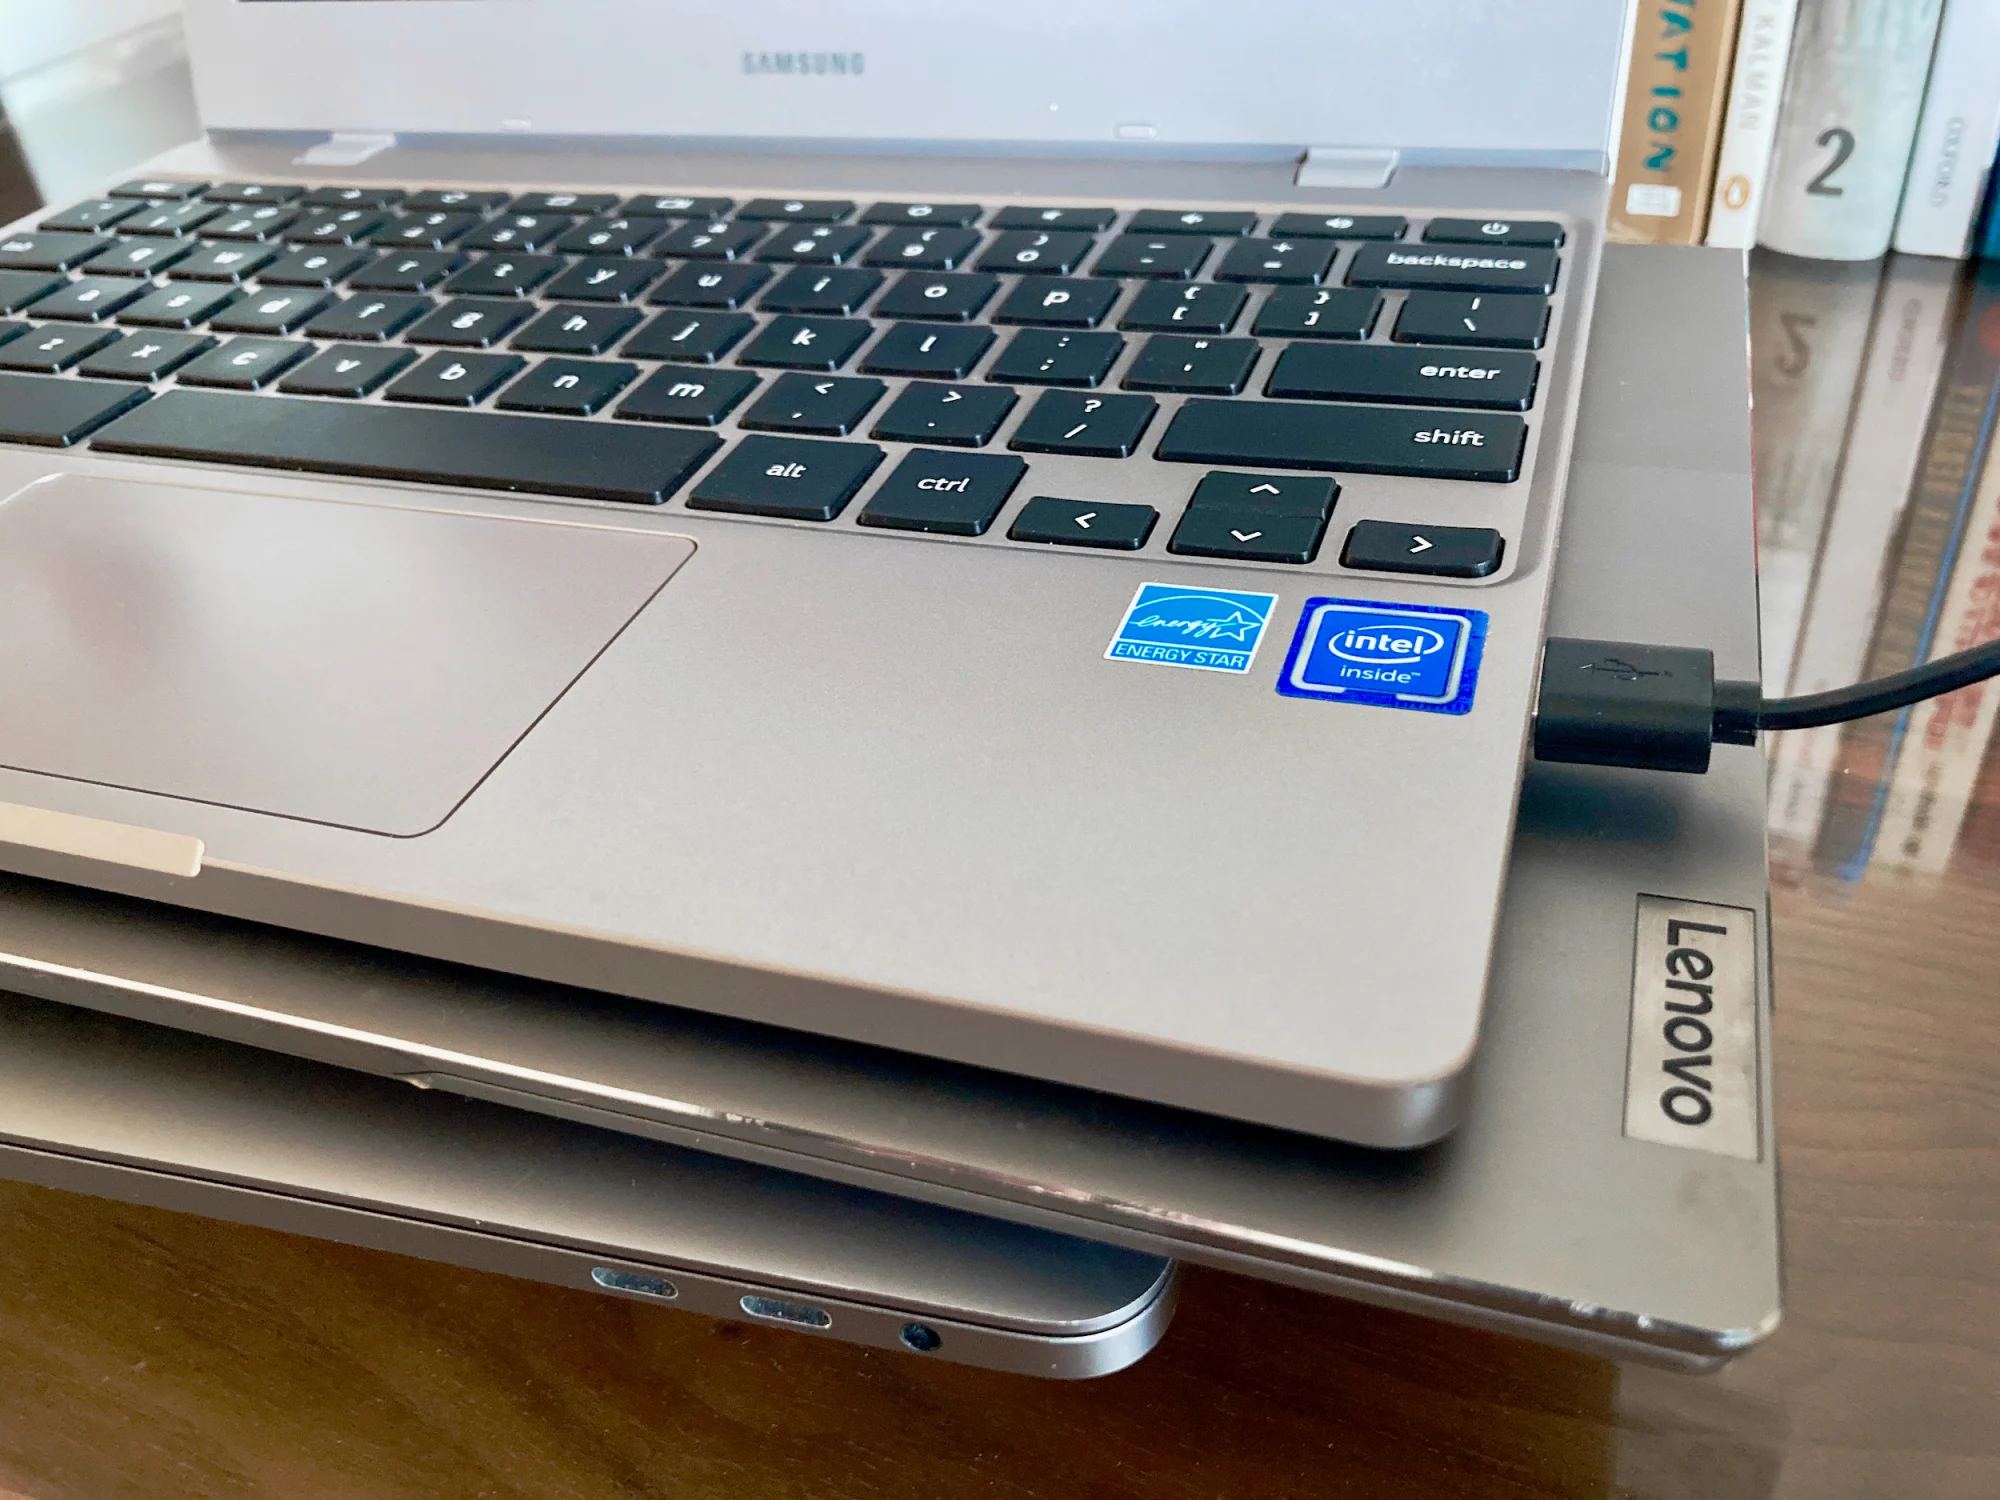 close-up view of Chromebook with “Intel Inside” sticker